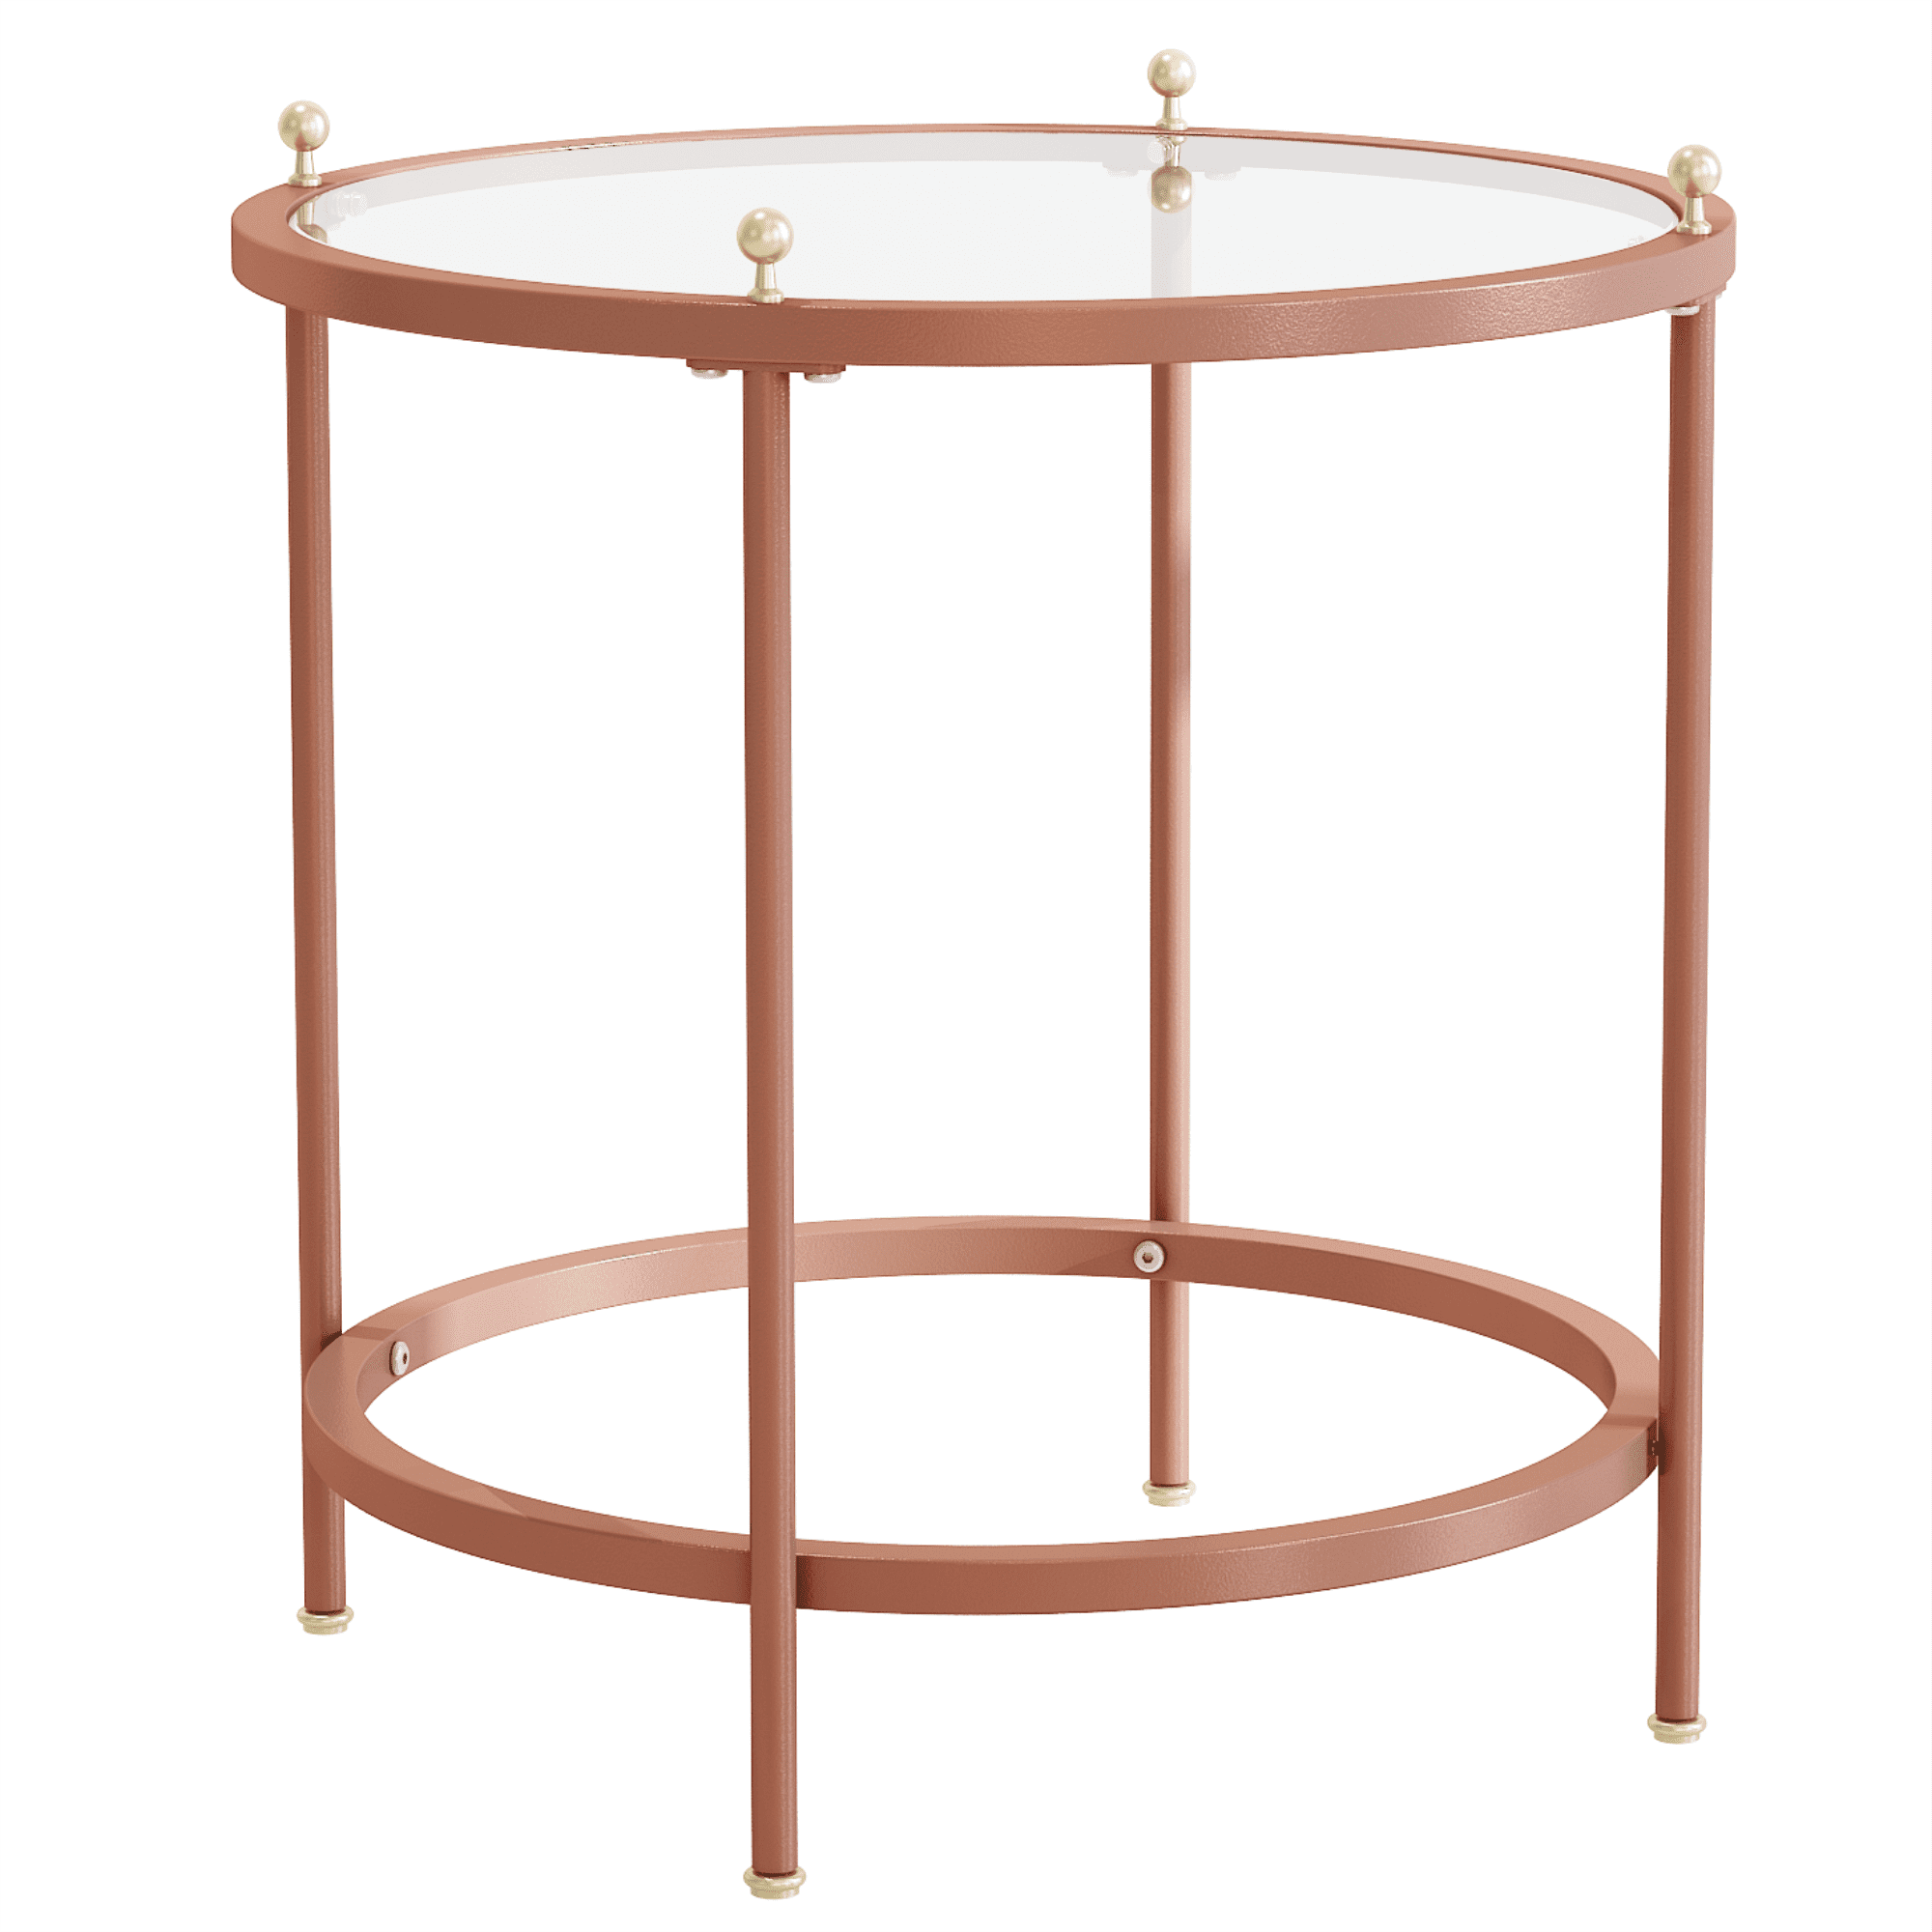 Resenkos Tempered Glass Tabletop End Table, Round Storage Side Table with Rose Golden Metal Frame for Bedroom Living Room